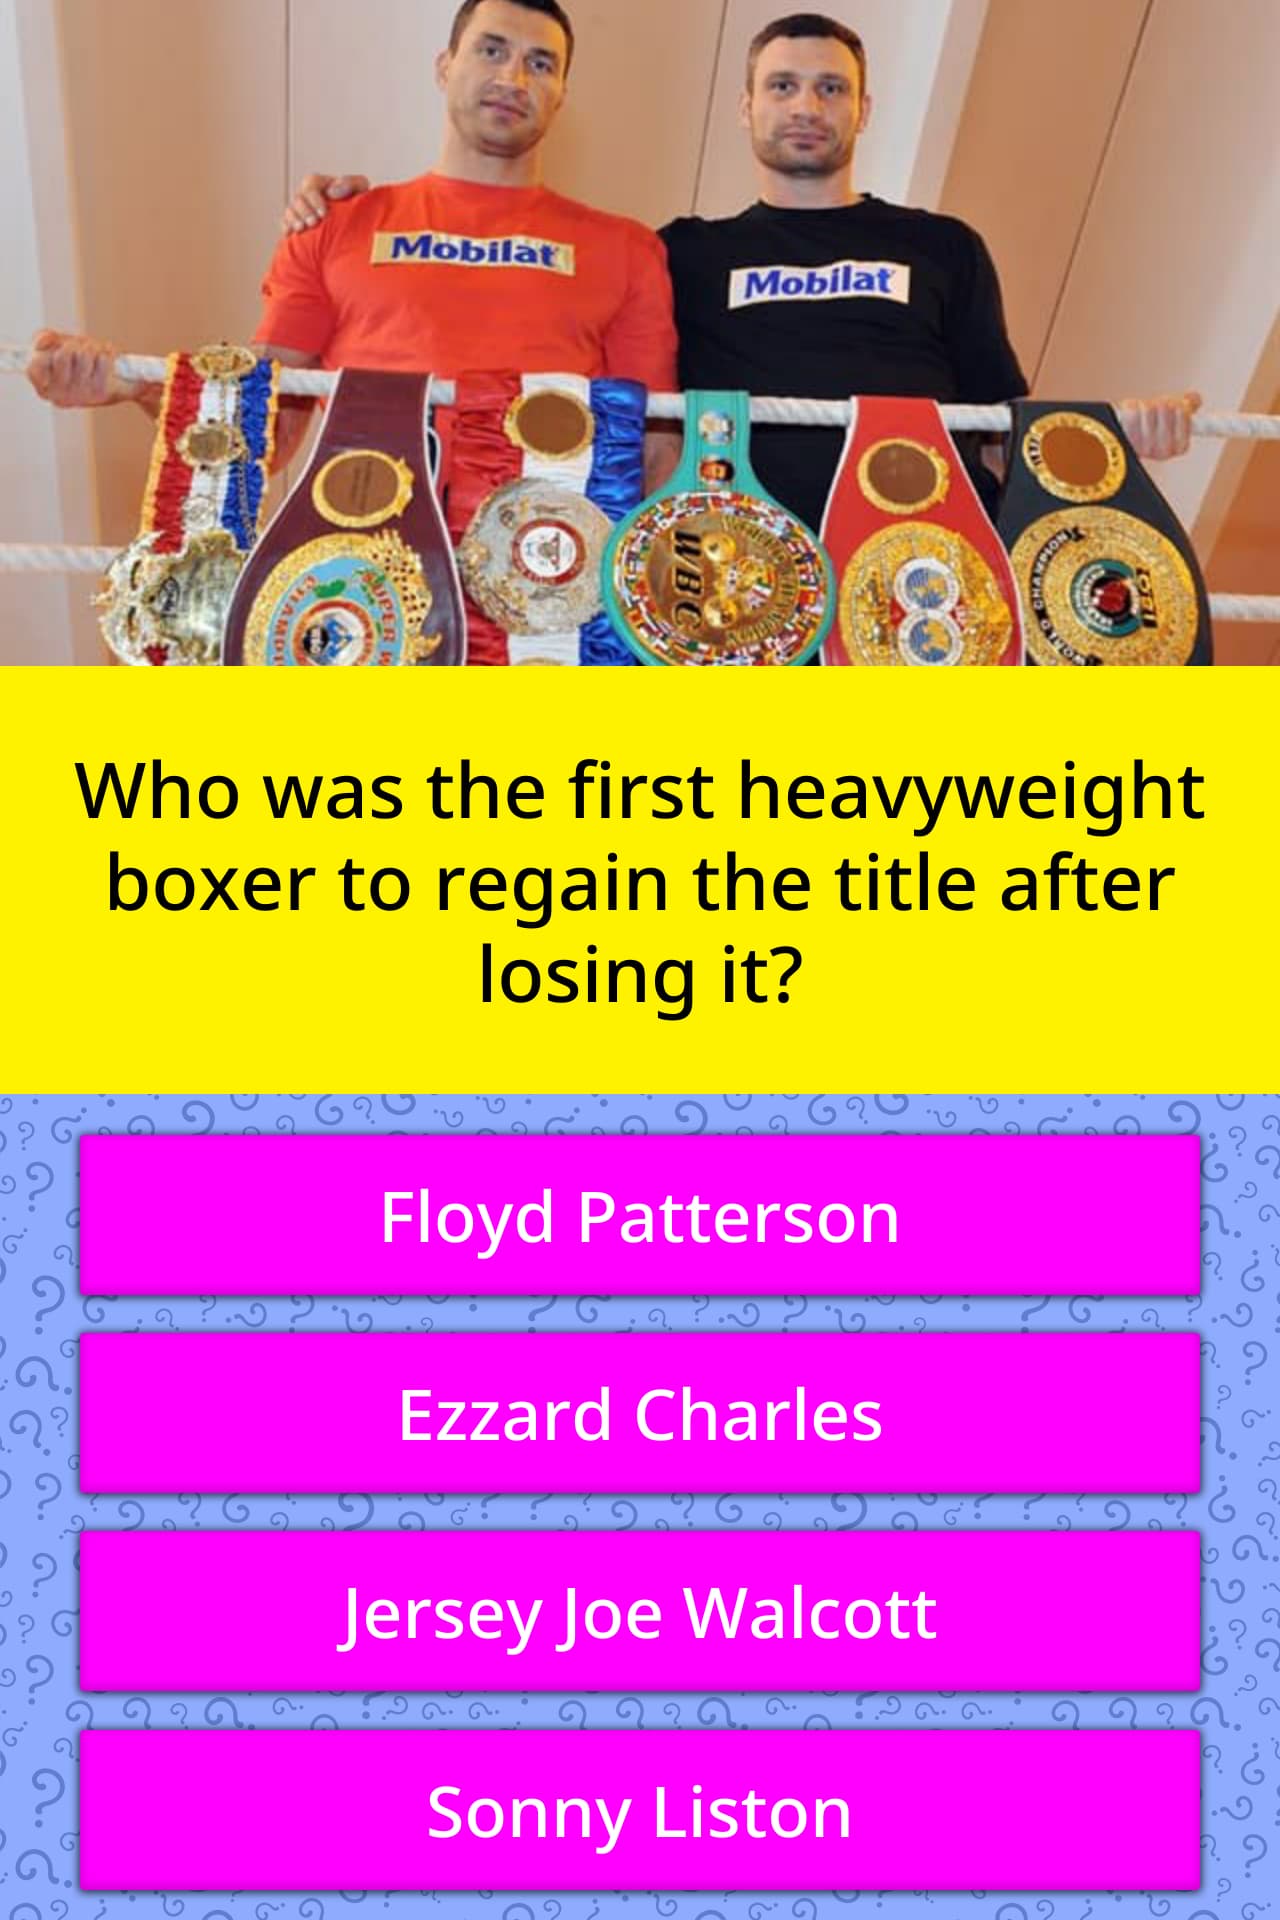 First heavyweight boxer to regain title